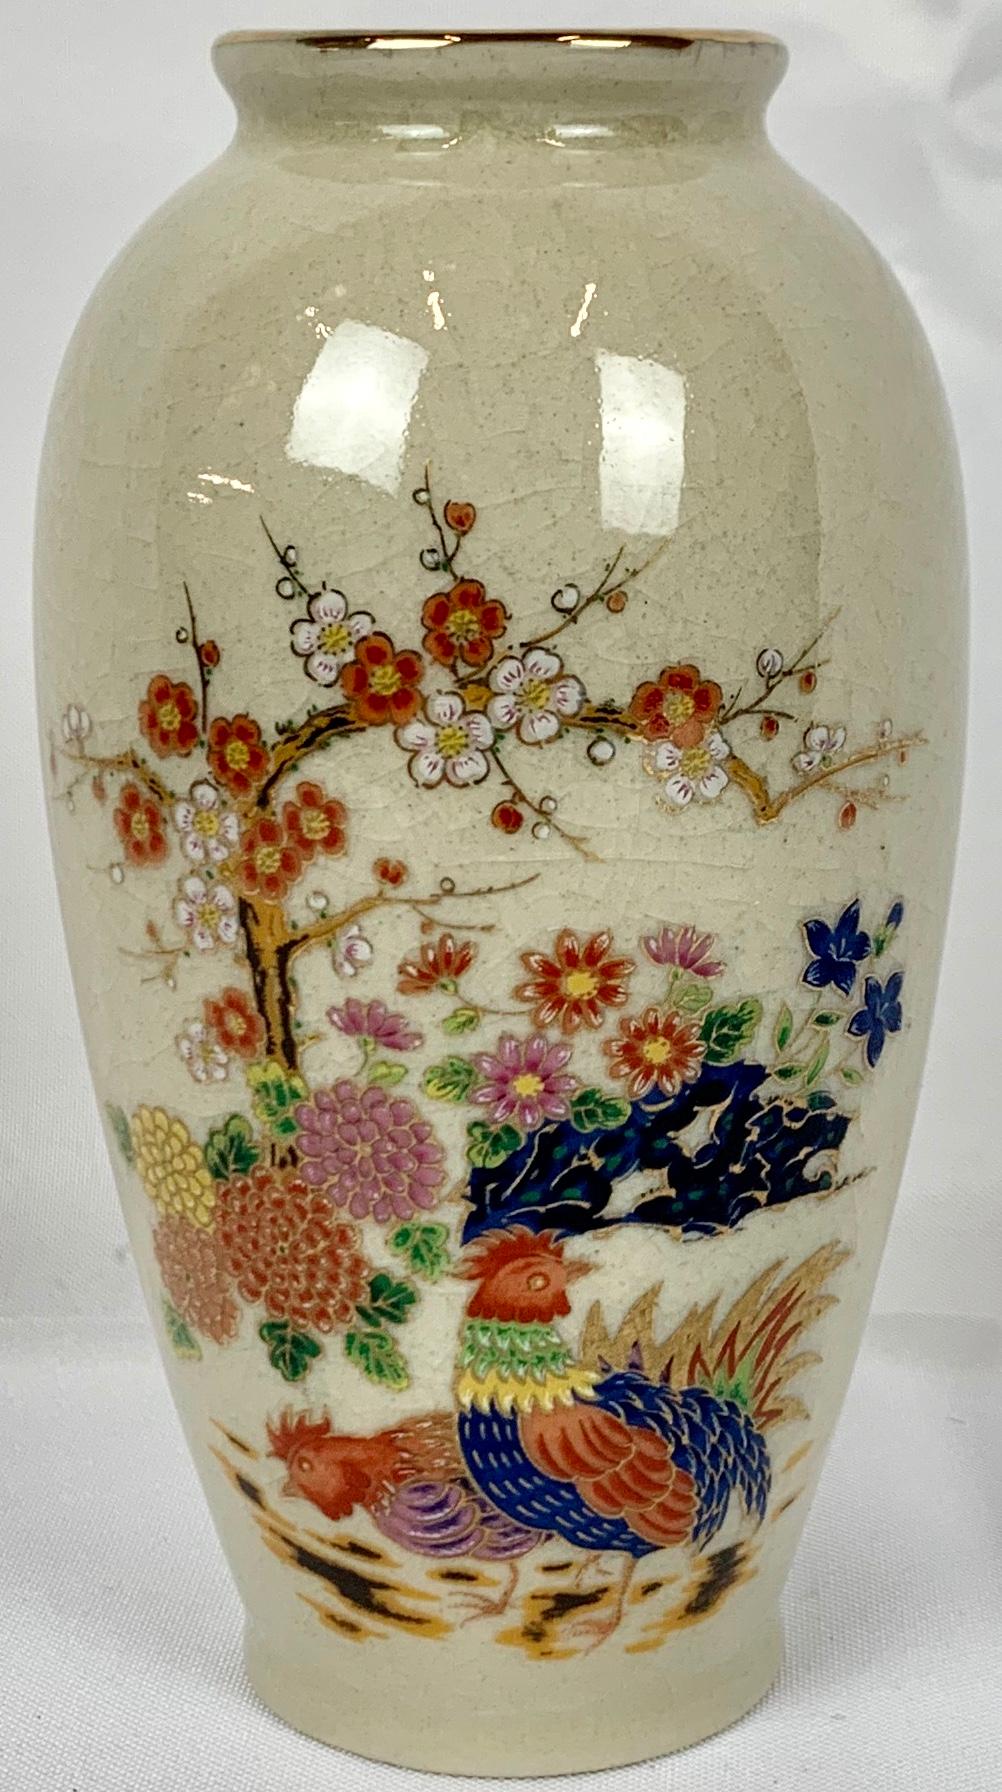 Japanese porcelain vase delicately hand painted on an craquelure oatmeal colored ground. The brightly colored design is of prunus blossoms, chrysanthemums and several roosters all outlined in gold. The top rim has been decorated with a gold